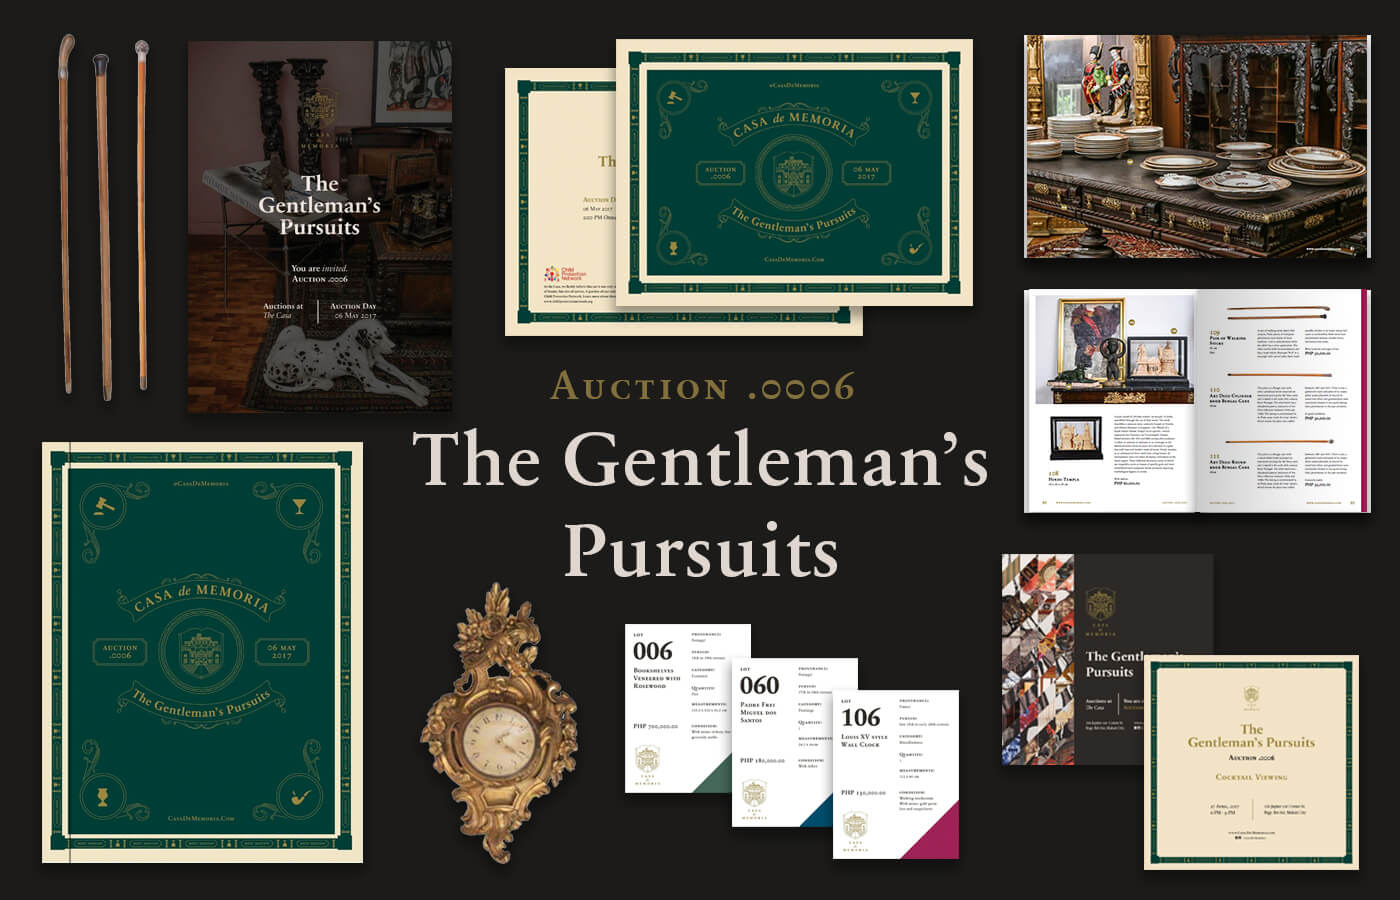 Campaign branding and collaterals designed for The Gentleman's Pursuits Auction for Casa de Memoria